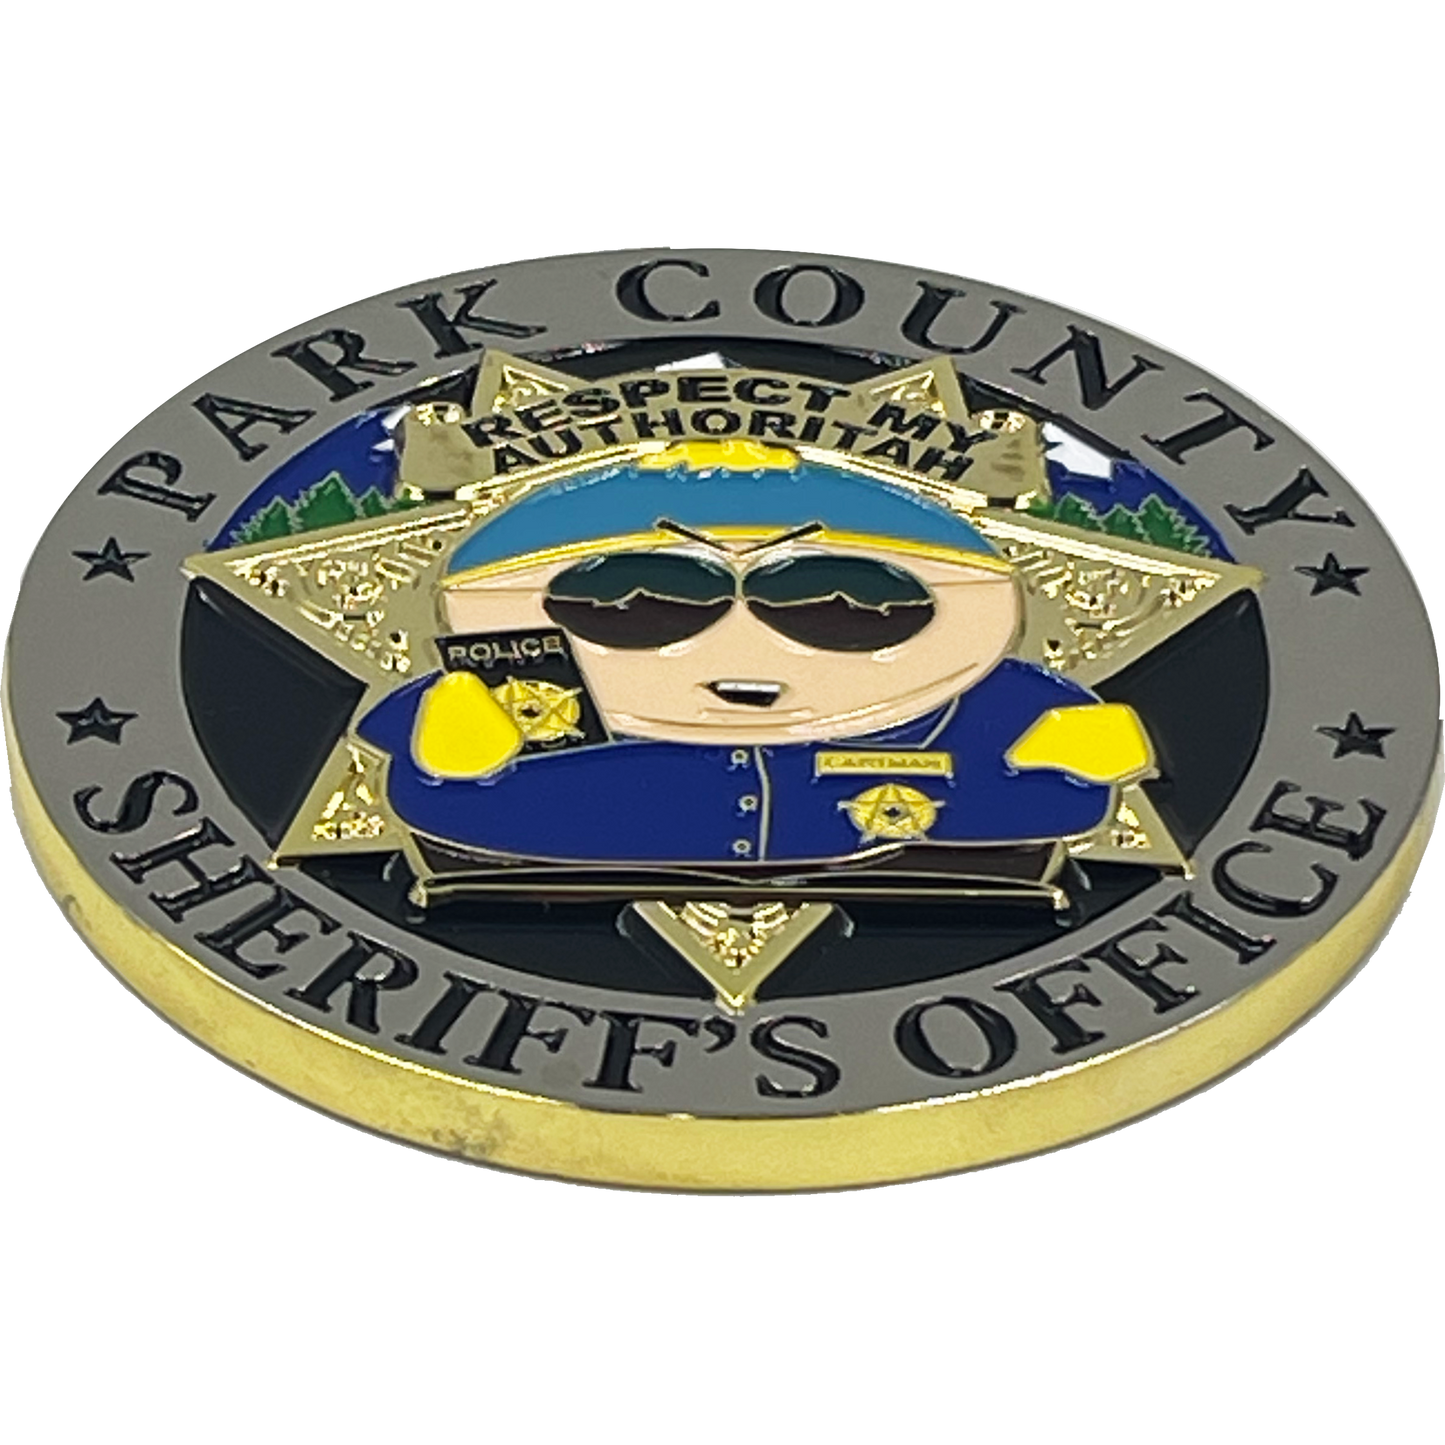 BL17-002 South Park County Sheriff's Office POLICE Cartman Challenge Coin